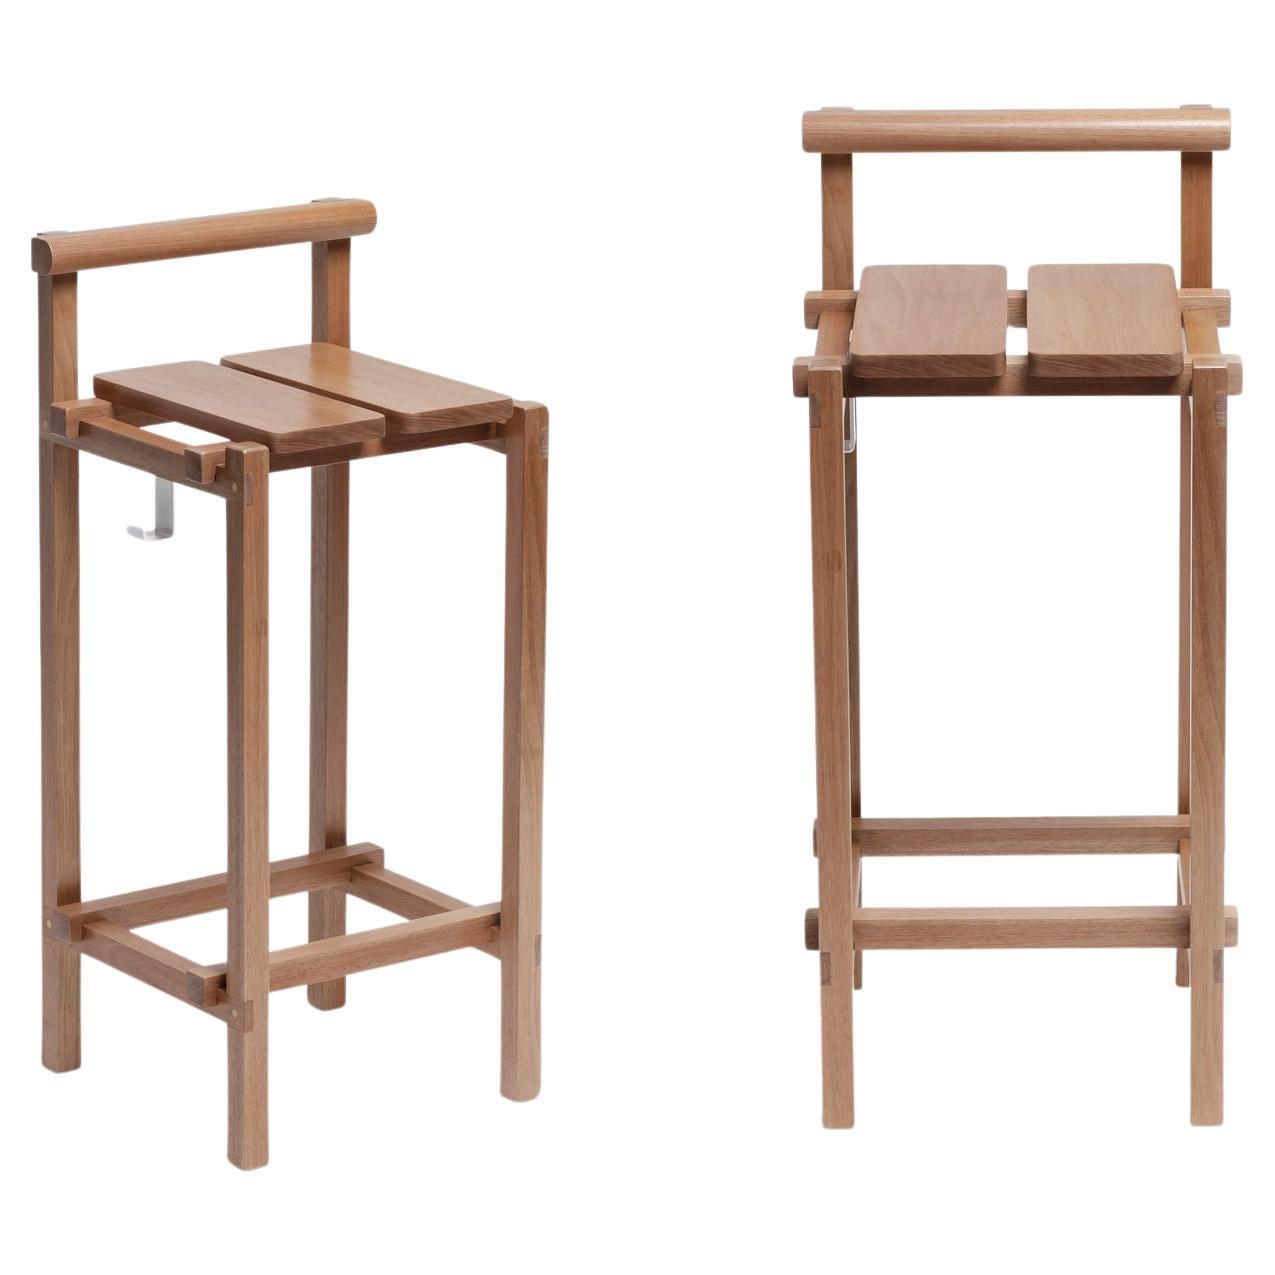 Set of 2 M Stools, Contemporary Handcrafted Stools in Hardwood